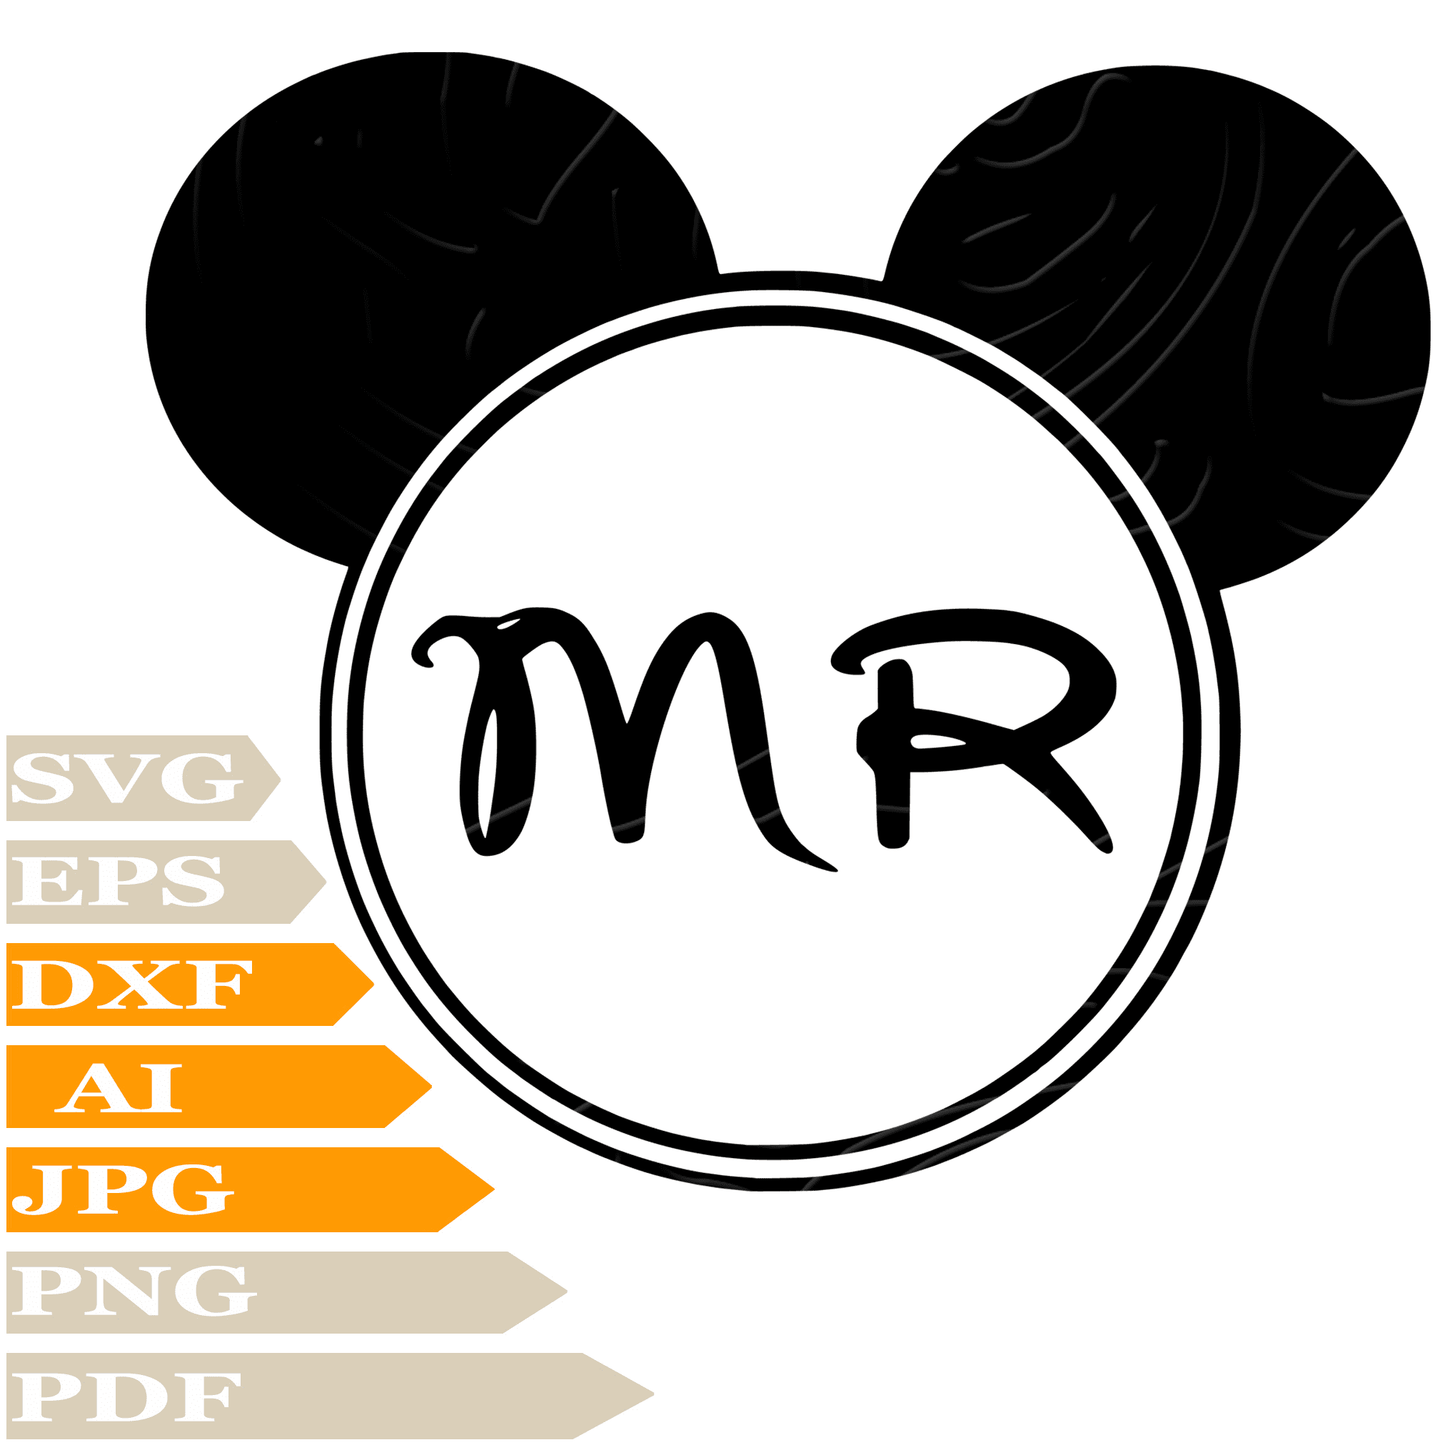 Mickey SVG File-Mickey Mause Personalized SVG-Mickey Mause M.R Drawing SVG-Mickey Mause Vector ClipArt's-SVG Cut Files-Illustration-PNG-Decal-Circuit-Digital Files-For Shirts-Silhouette